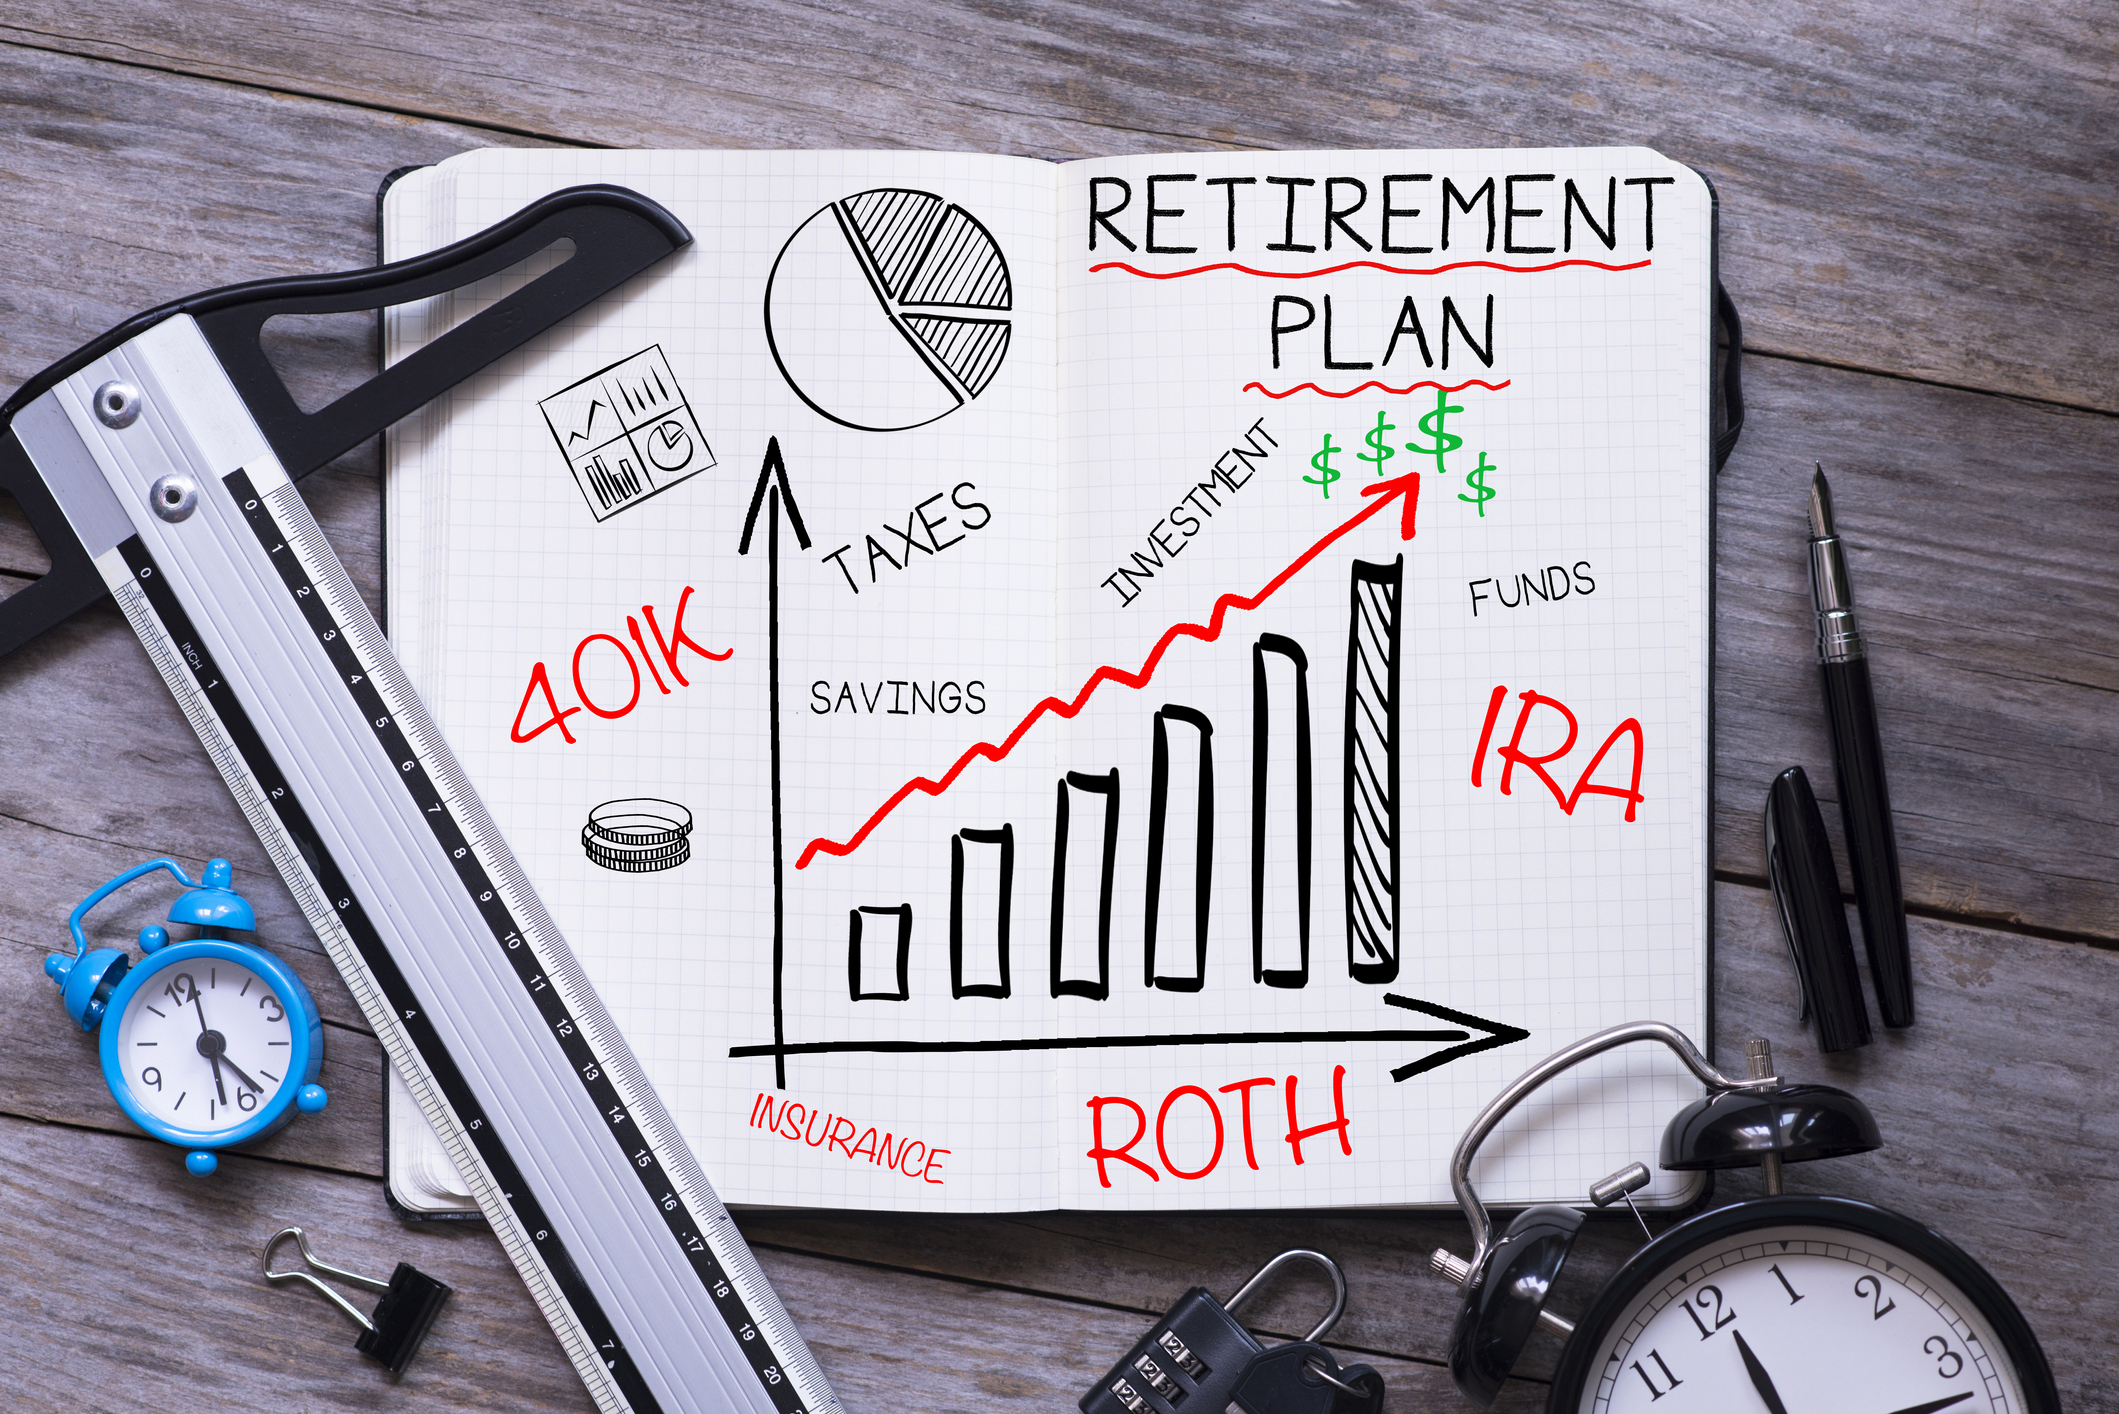 Roll It Over: Don’t Leave Your 401k Savings Behind